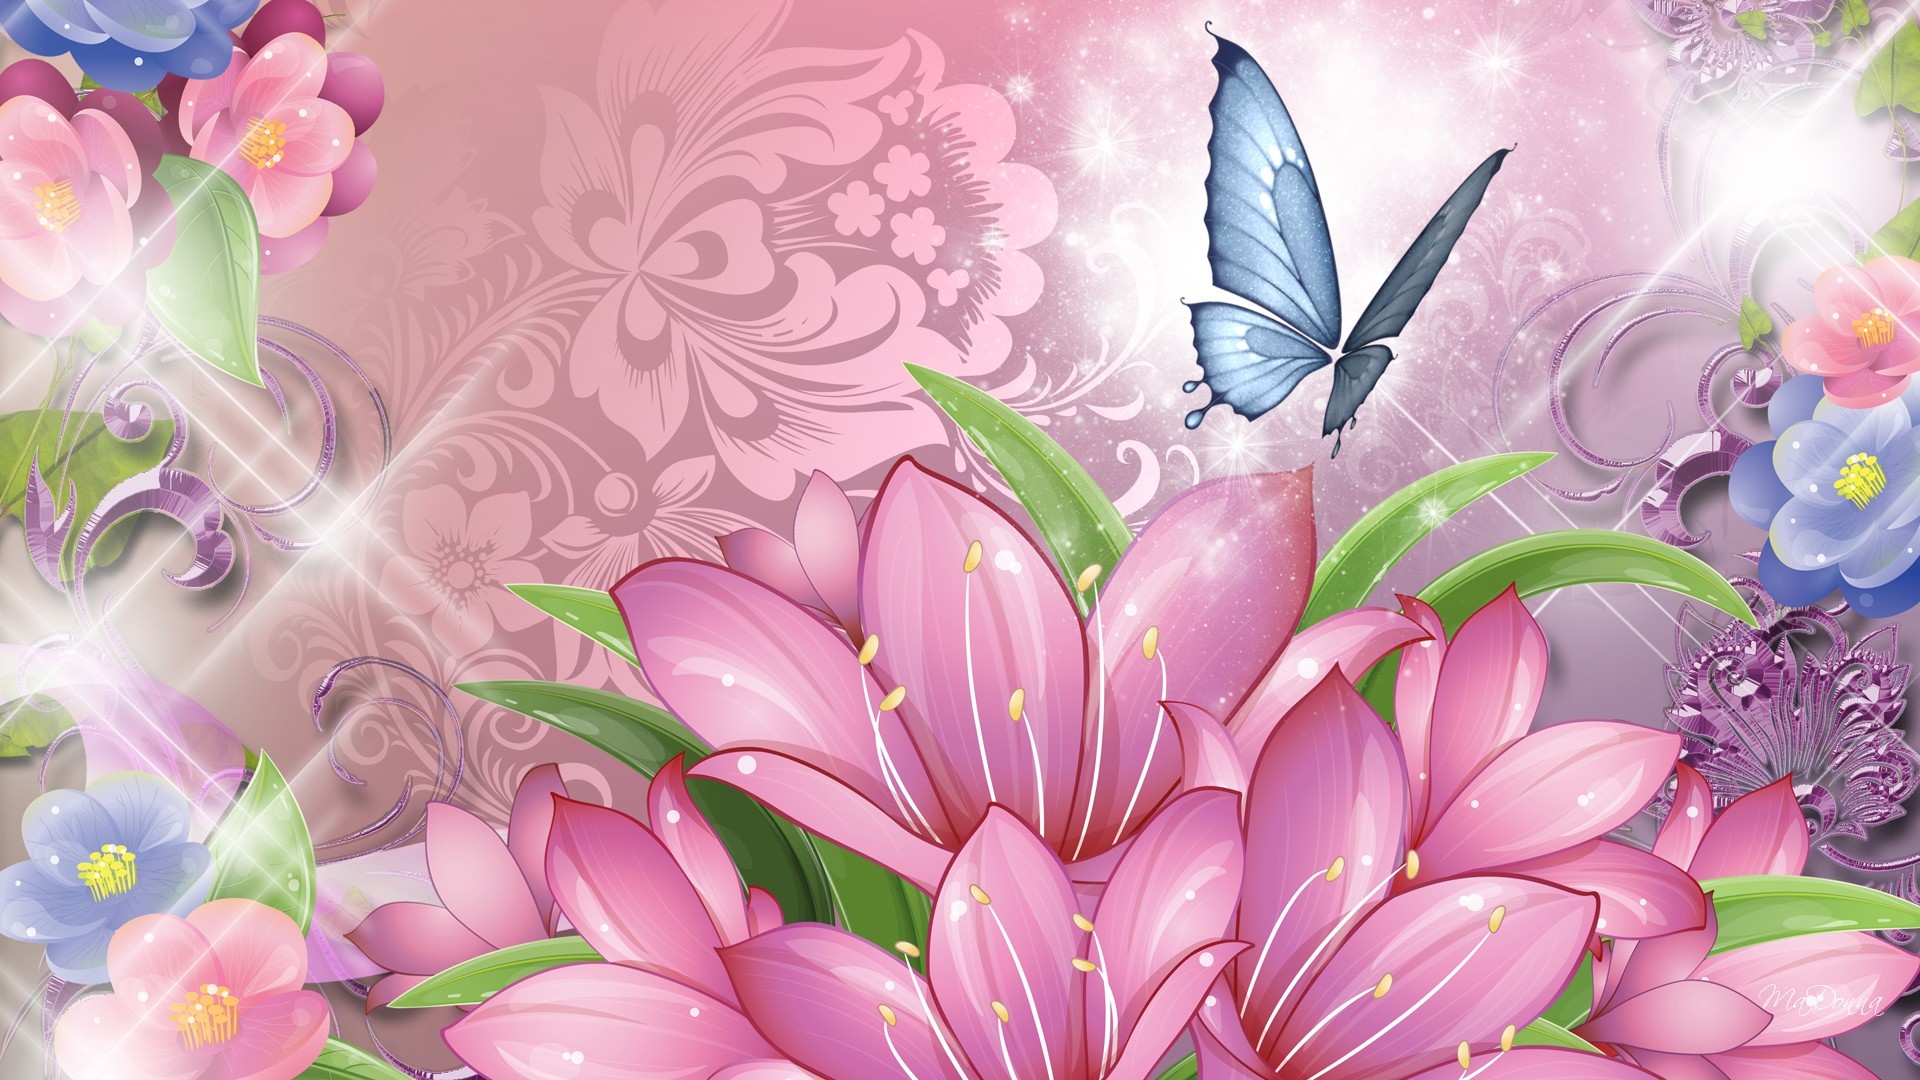 Blue Butterfly and Pink Flowers Wallpaper HD